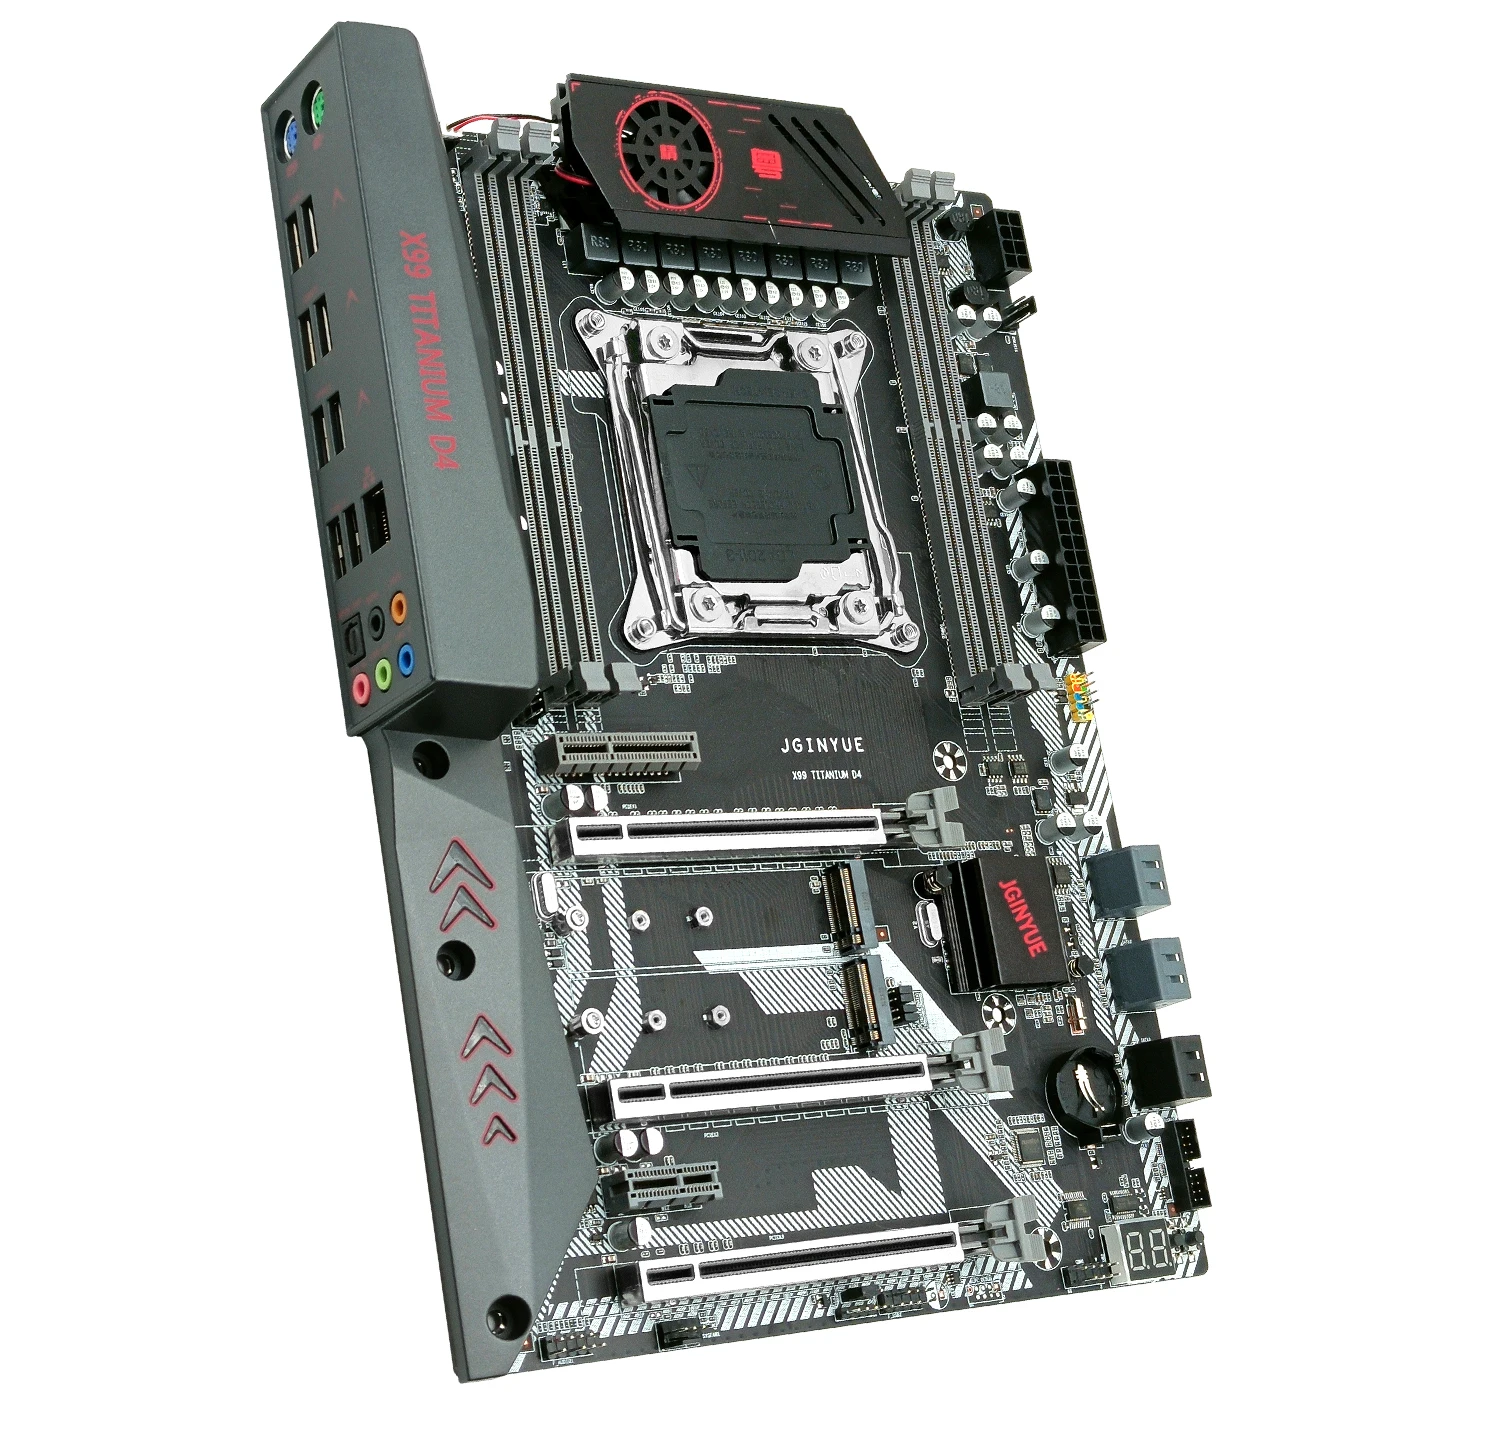 most powerful motherboard JGINYUE X99 Motherboard Xeon Kit With E5 2660 V4 CPU LAG 2011-3 DDR4 64GB=4x16GB 2133MHz RAM Memory NVME SATA M.2 Four Channel best motherboard 